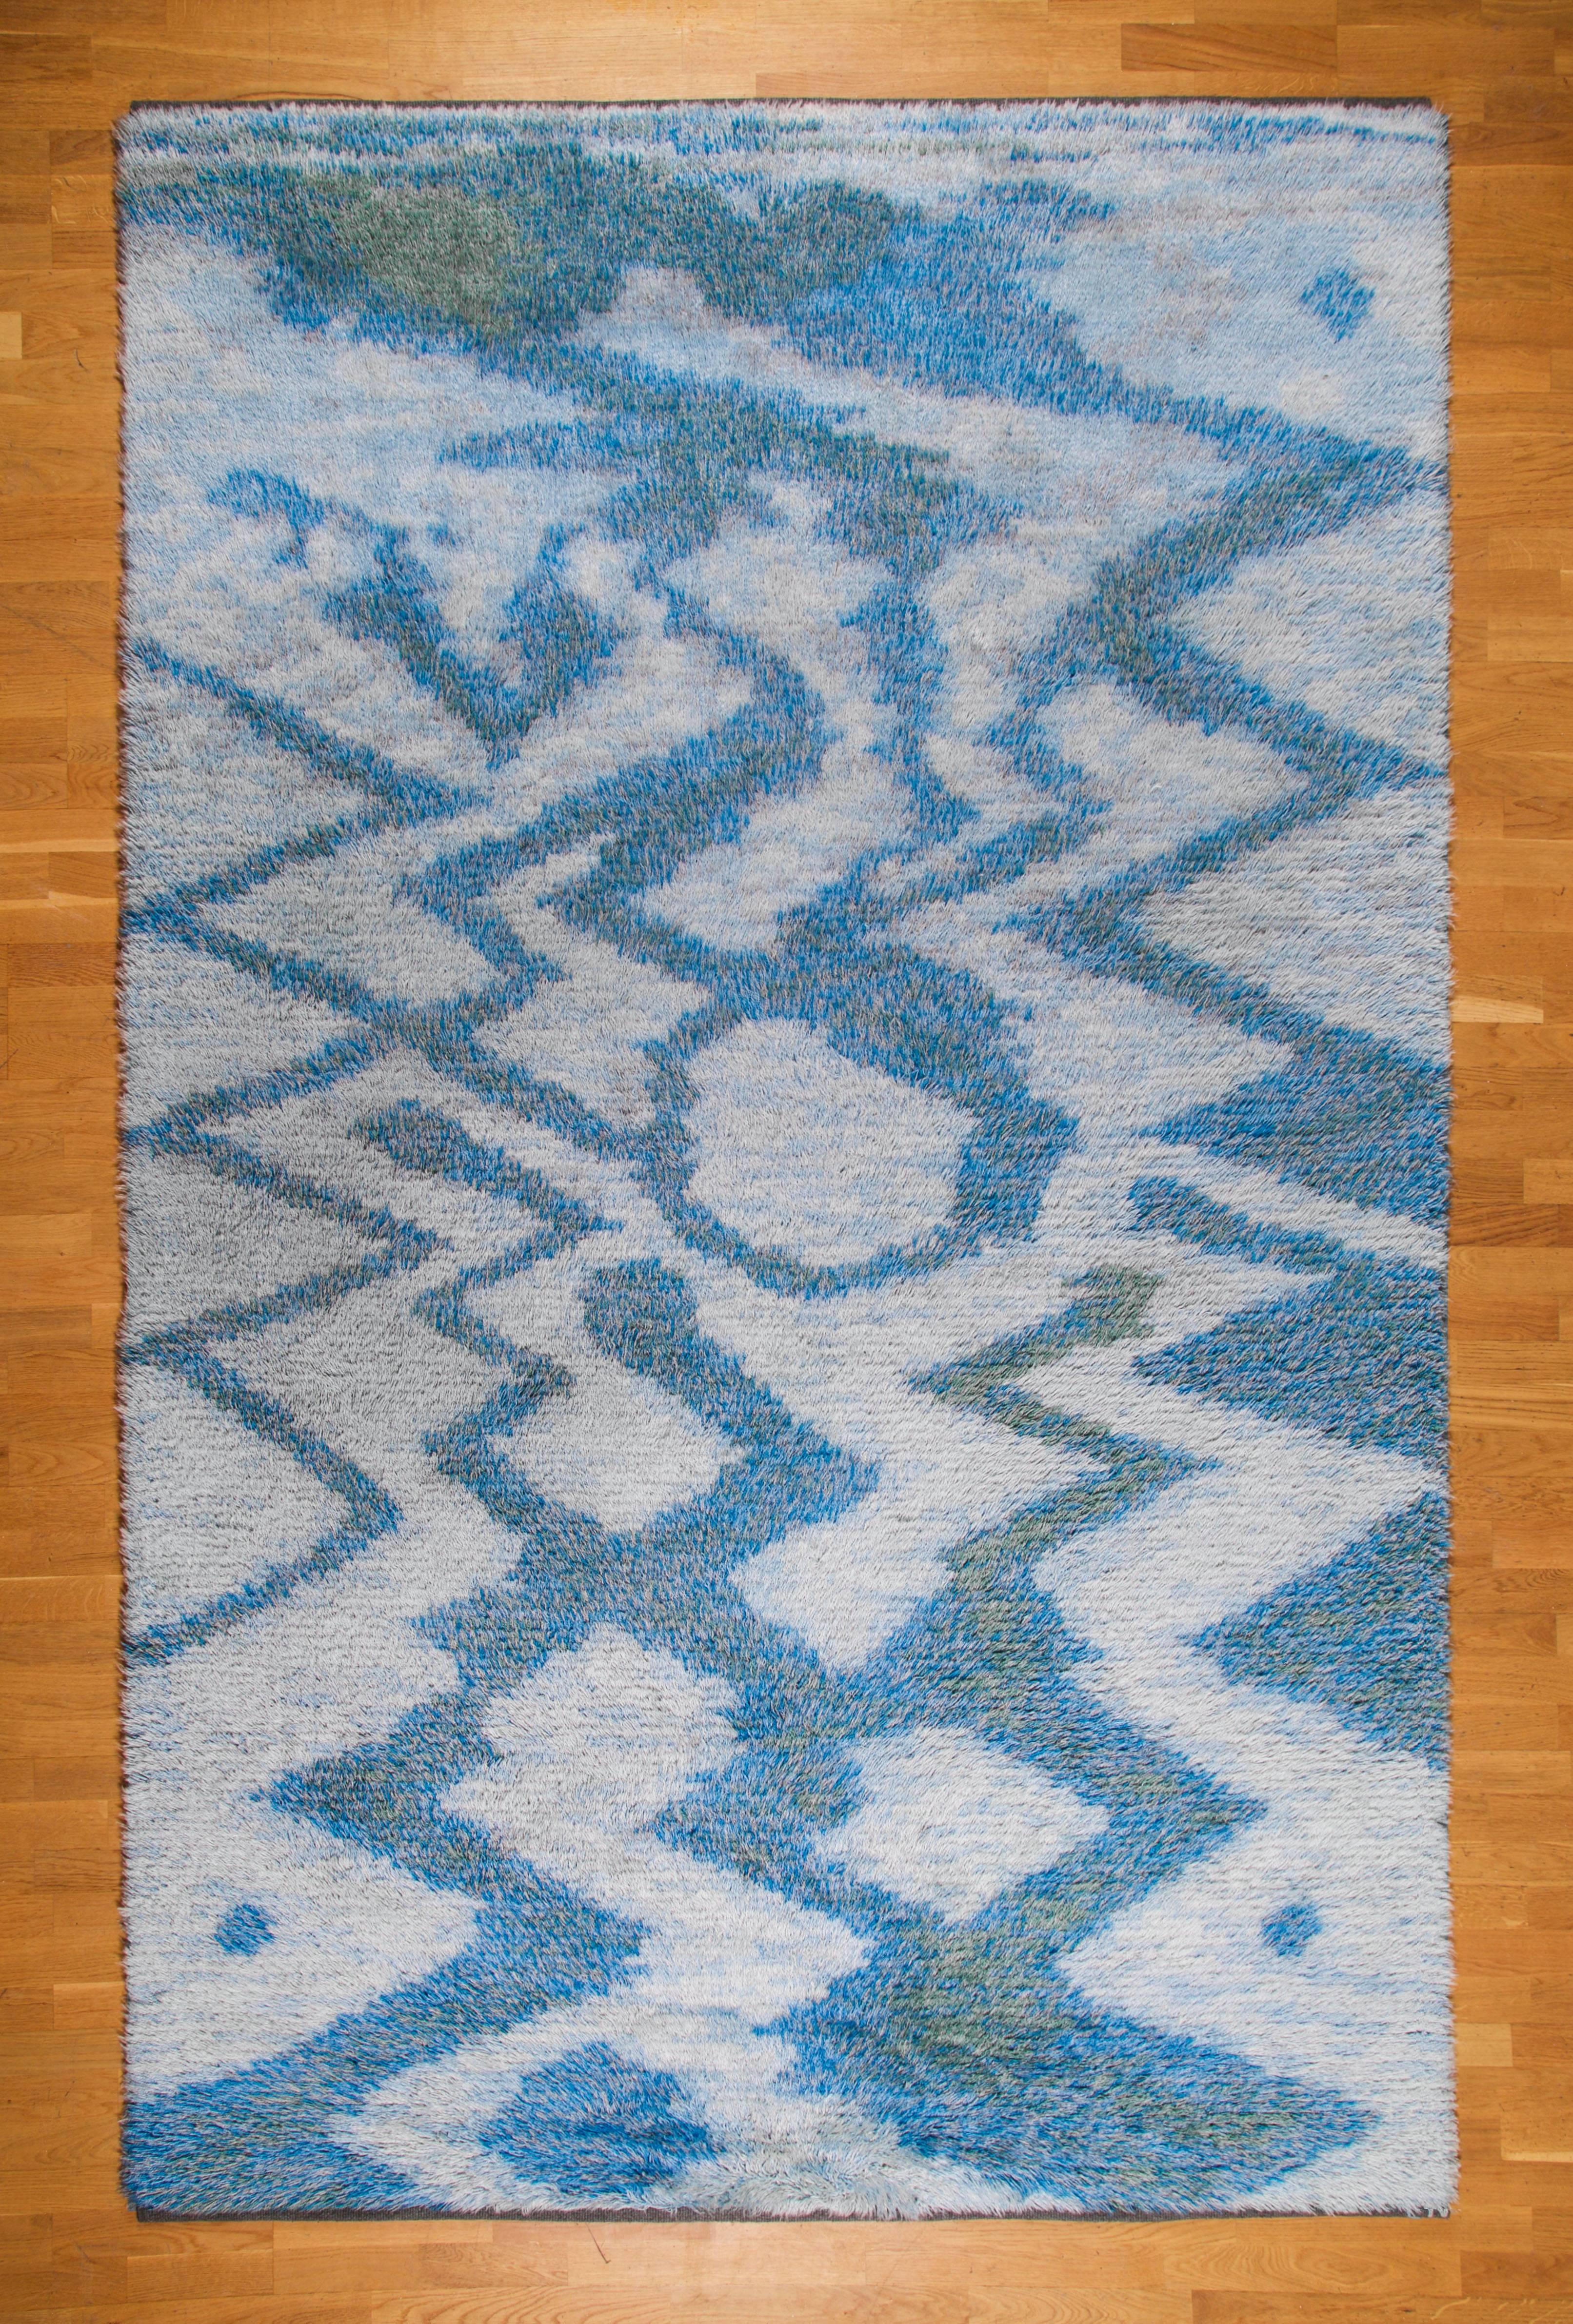 Large Swedish knotted carpet with rya technique,

Sweden, circa 1950s.
Signed {EN}.

Handwoven wool in blue and green hues.
Measures:
294 x 181 cm.
115.8 x 71.26 in.